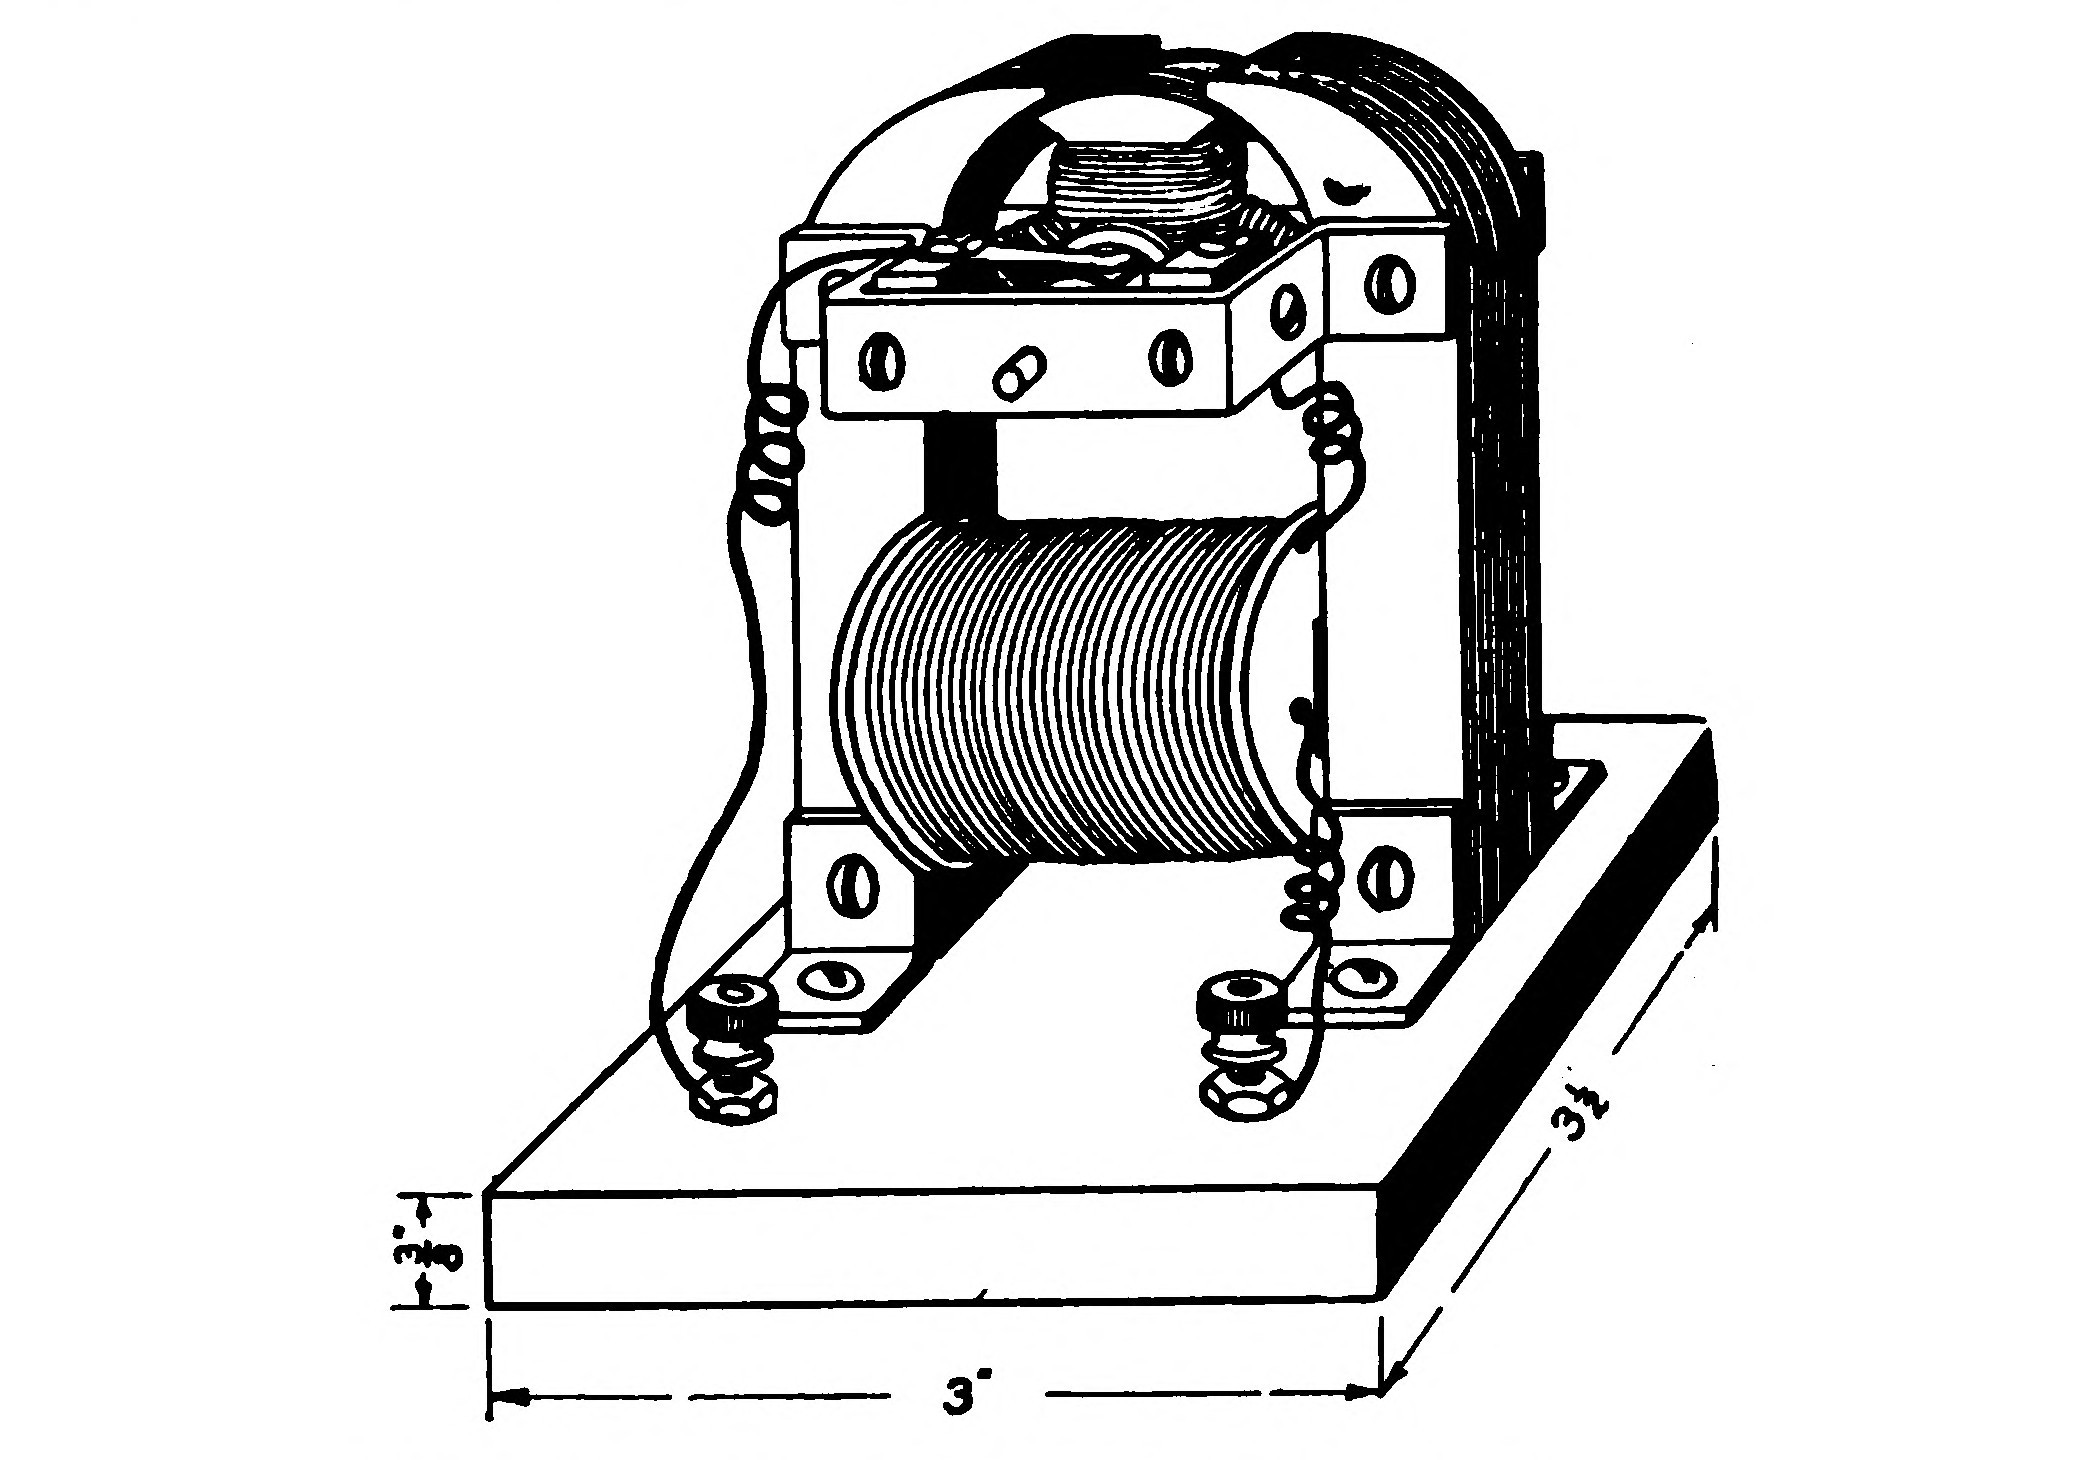 FIG. 133.—The completed Electric Motor.